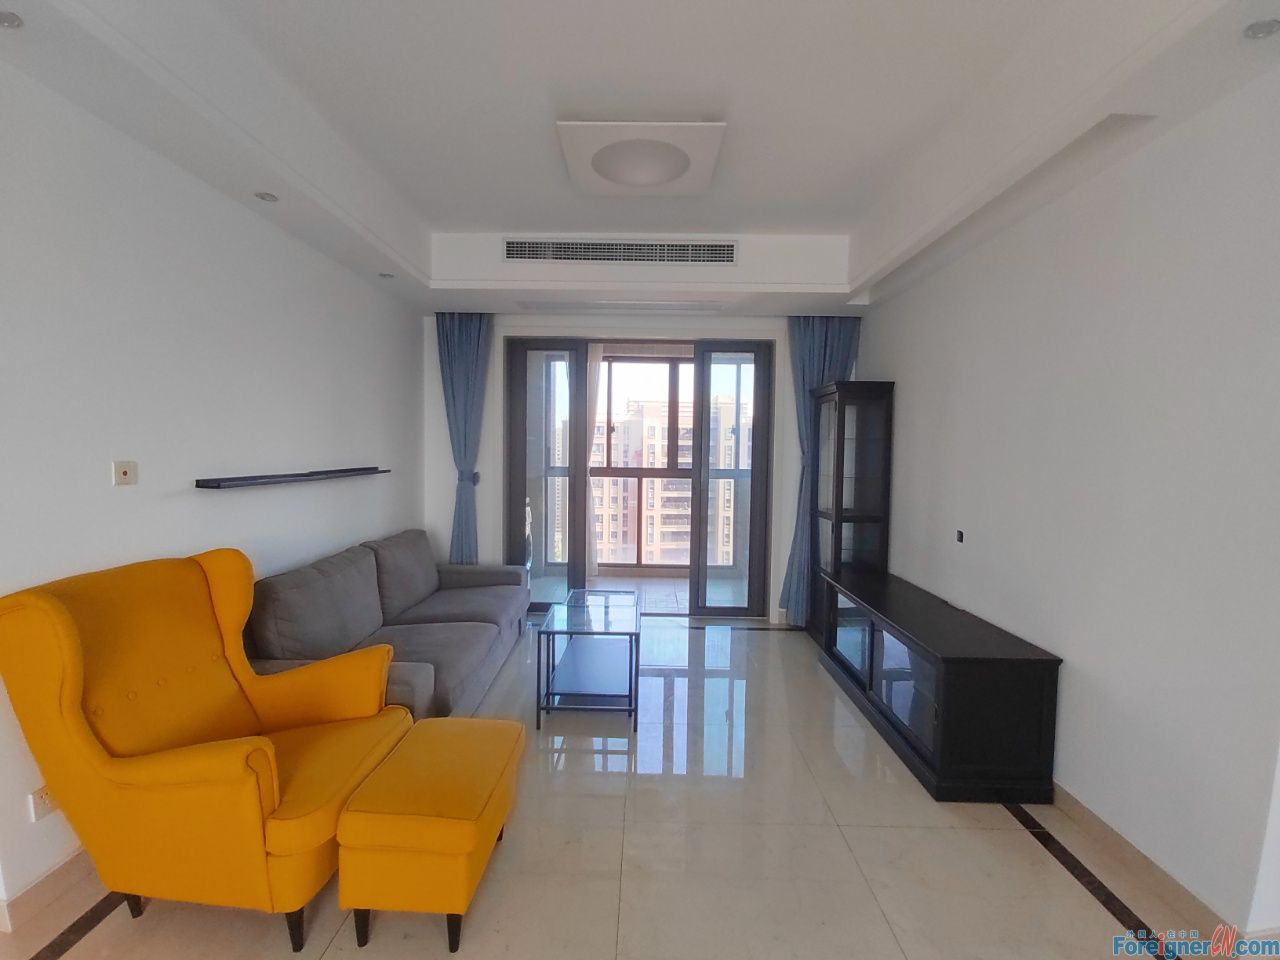 Gorgeous!!! Great House rent in Suzhou /3 bedrooms and 2 bathrooms/CEntral AC /Baitang Park/furnished apartment/subway station /Suzhou Industrial Park 